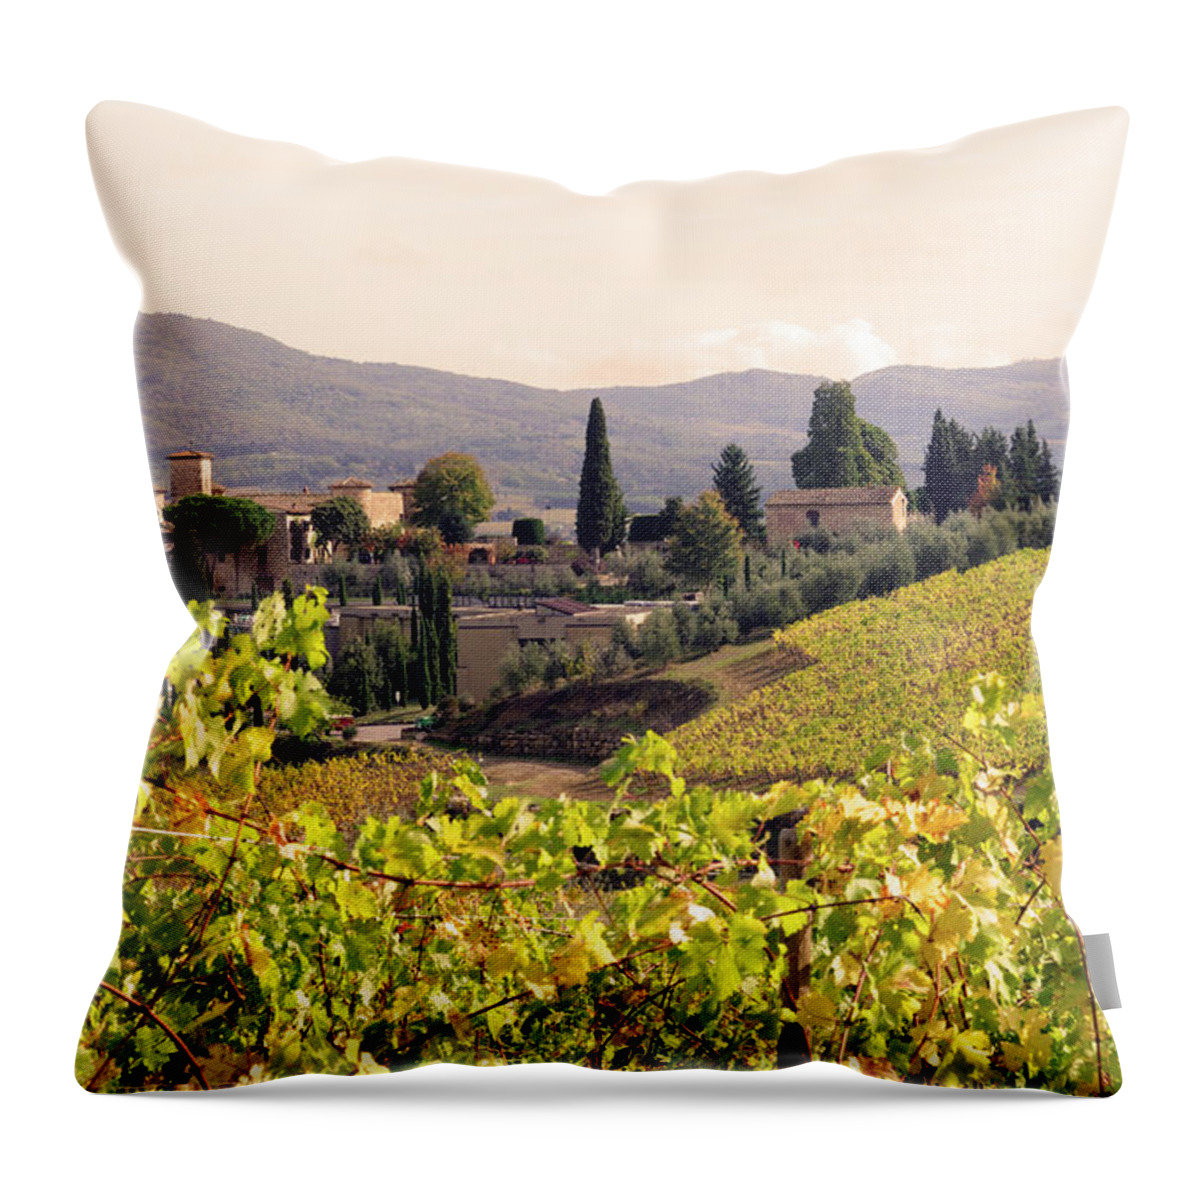 Scenics Throw Pillow featuring the photograph Italian Village And Vineyard In Fall by Lisa-blue